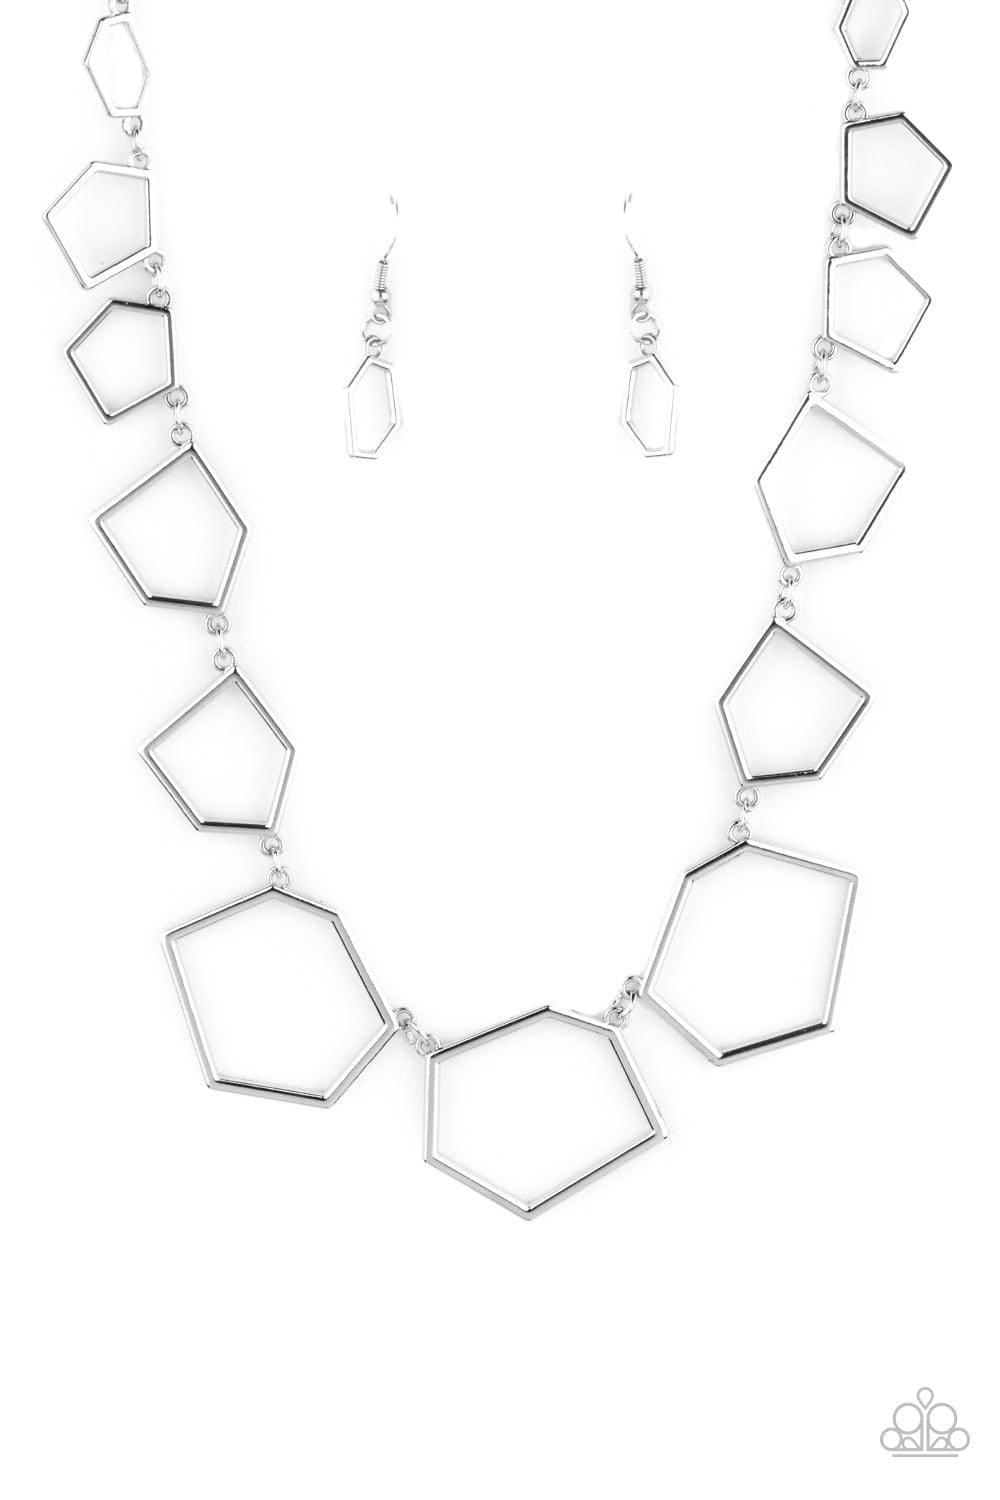 Paparazzi Accessories - Full Frame Fashion - Silver Necklace - Bling by JessieK